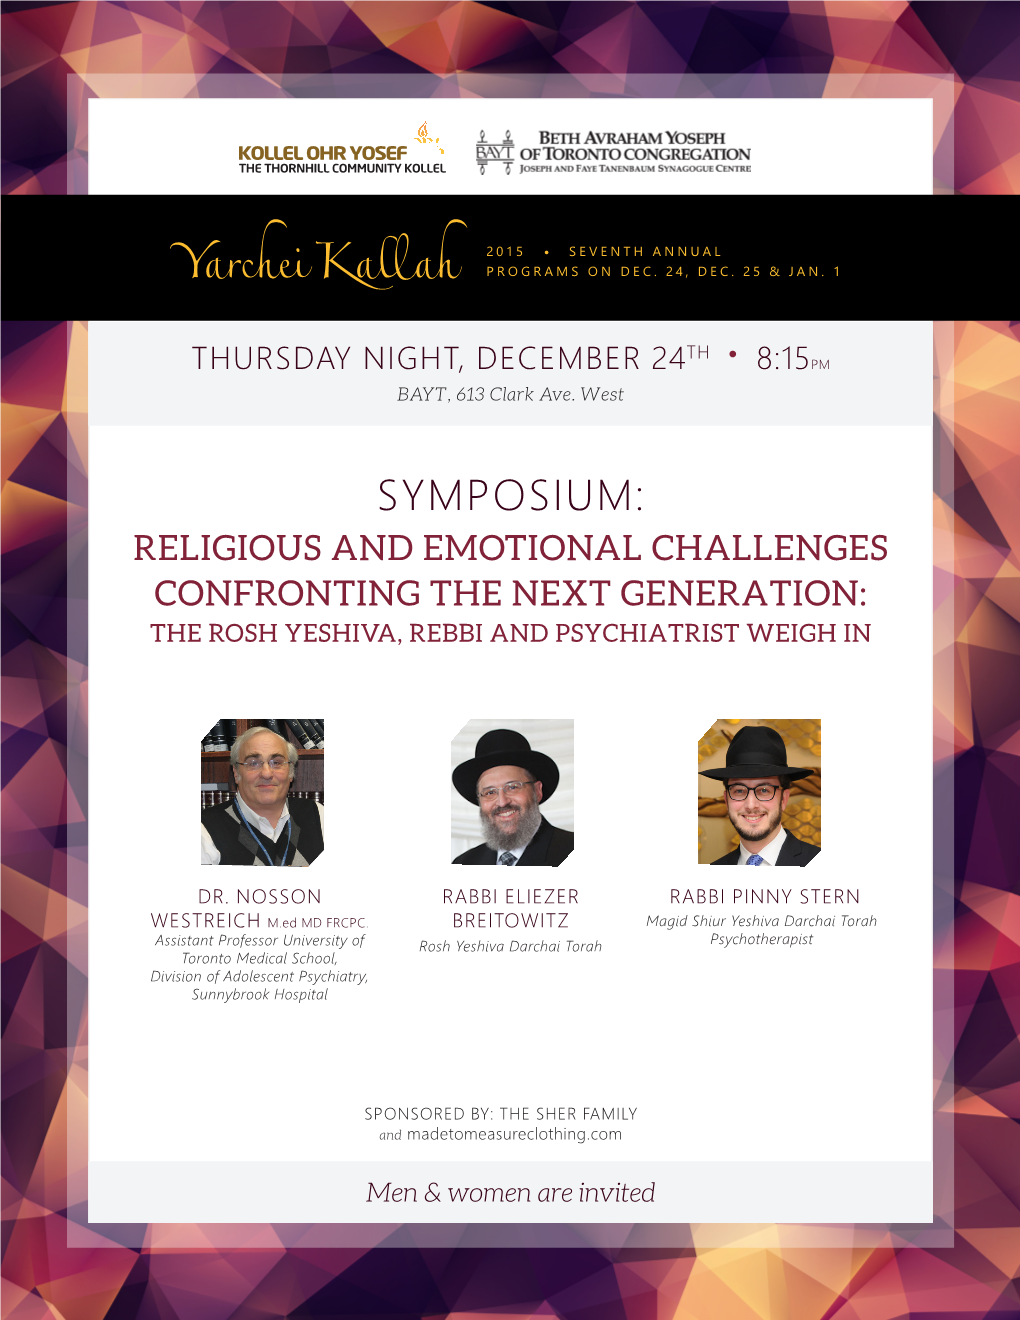 Symposium: Religious and Emotional Challenges Confronting the Next Generation: the Rosh Yeshiva, Rebbi and Psychiatrist Weigh In